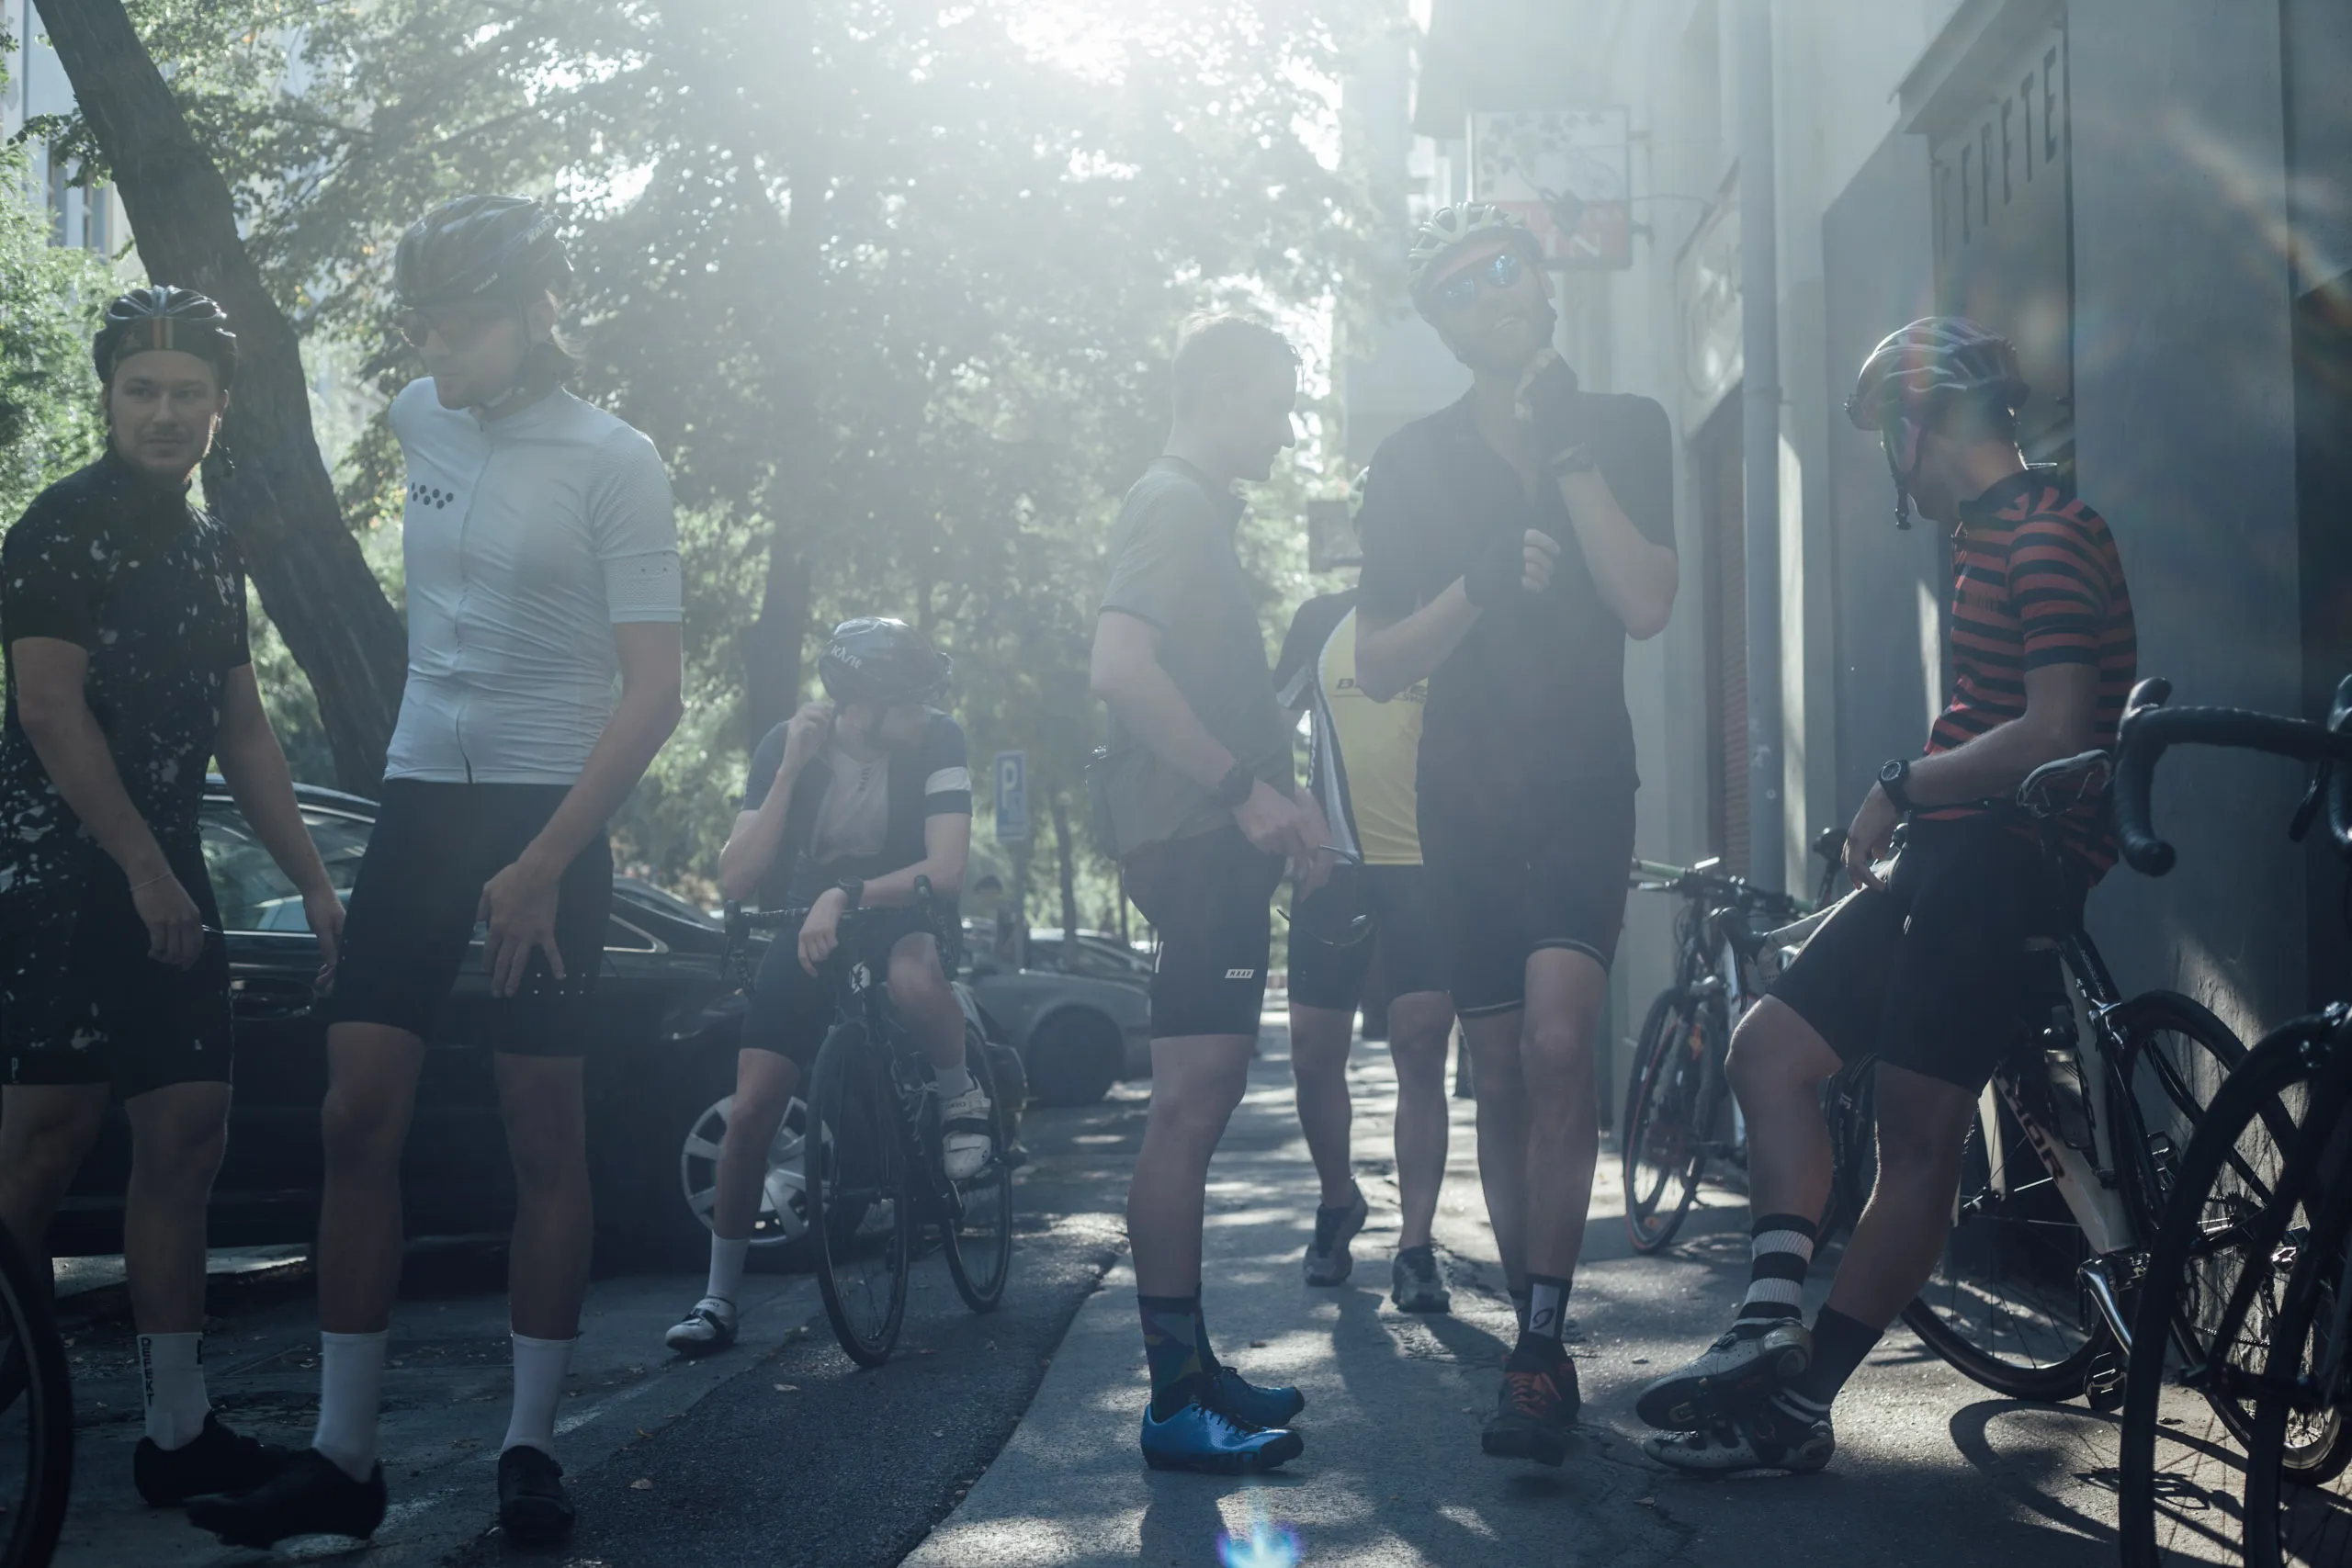 Repete, cycles, afterwork, rides, community